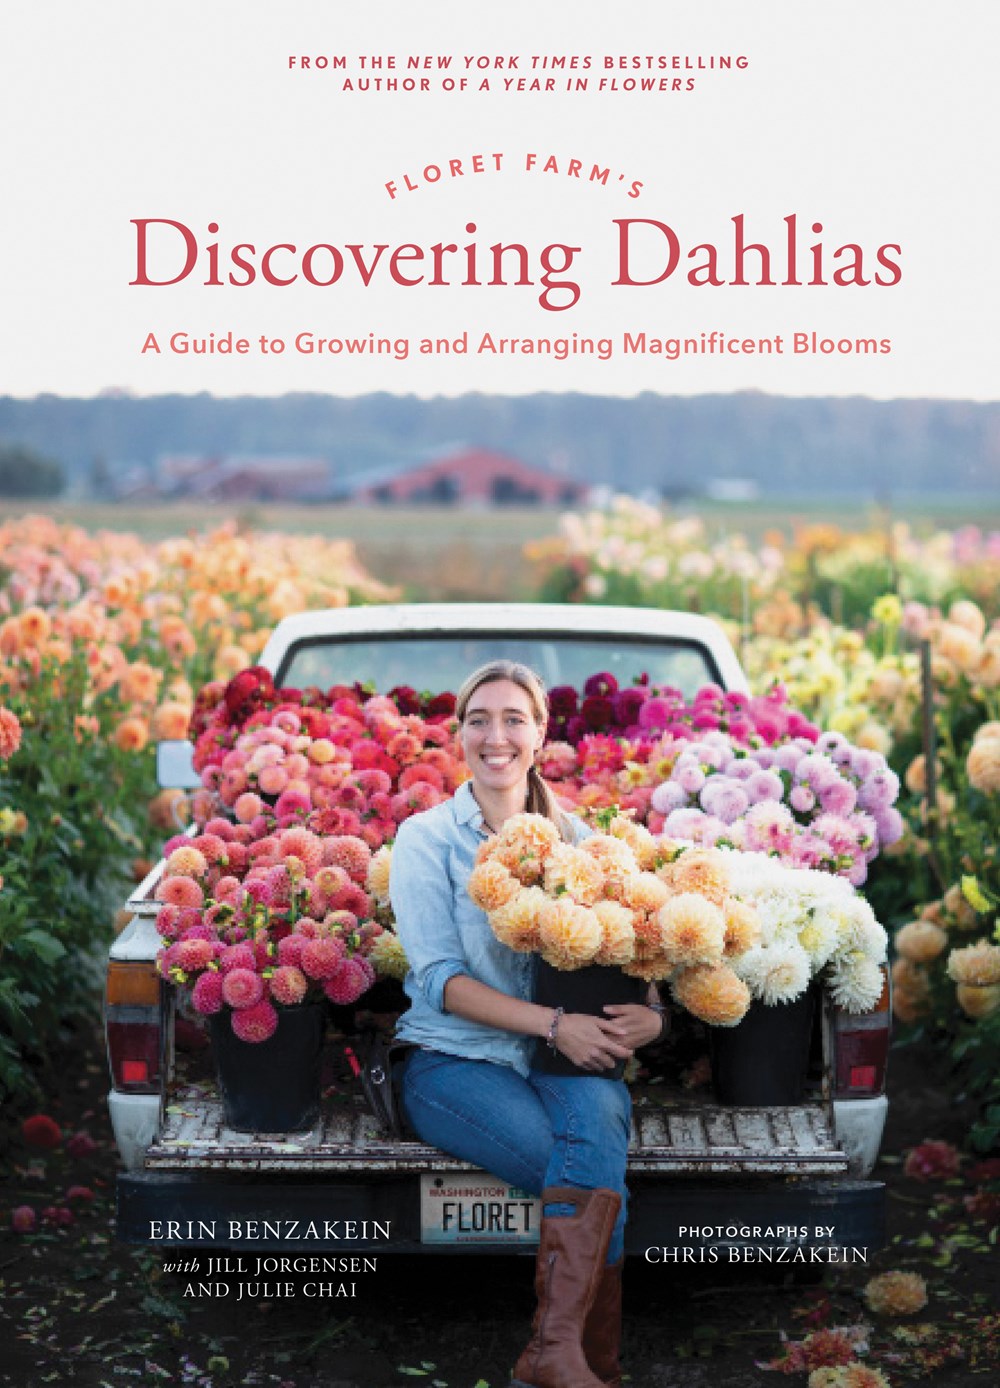 Floret Farm’s Discovering Dahlias: A Guide to Growing and Arranging Magnificent Blooms